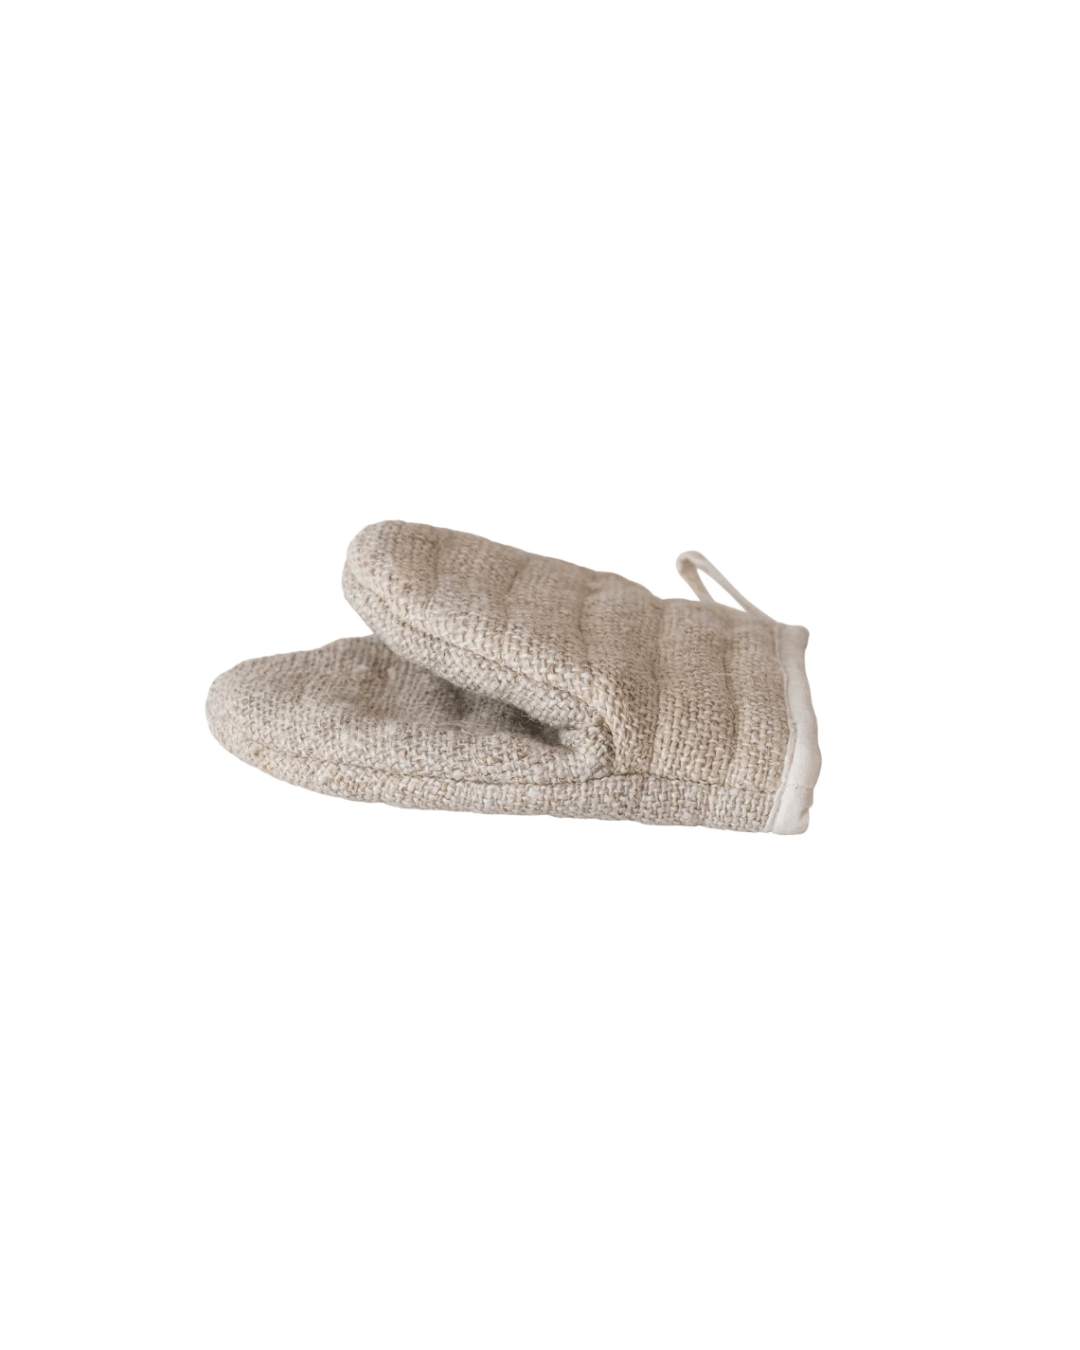 A Hemp Fiber &amp; Cotton Canvas Oven Mitt by Creative Co-op isolated on a white background, reminiscent of Scottsdale Arizona&#39;s warm tones.